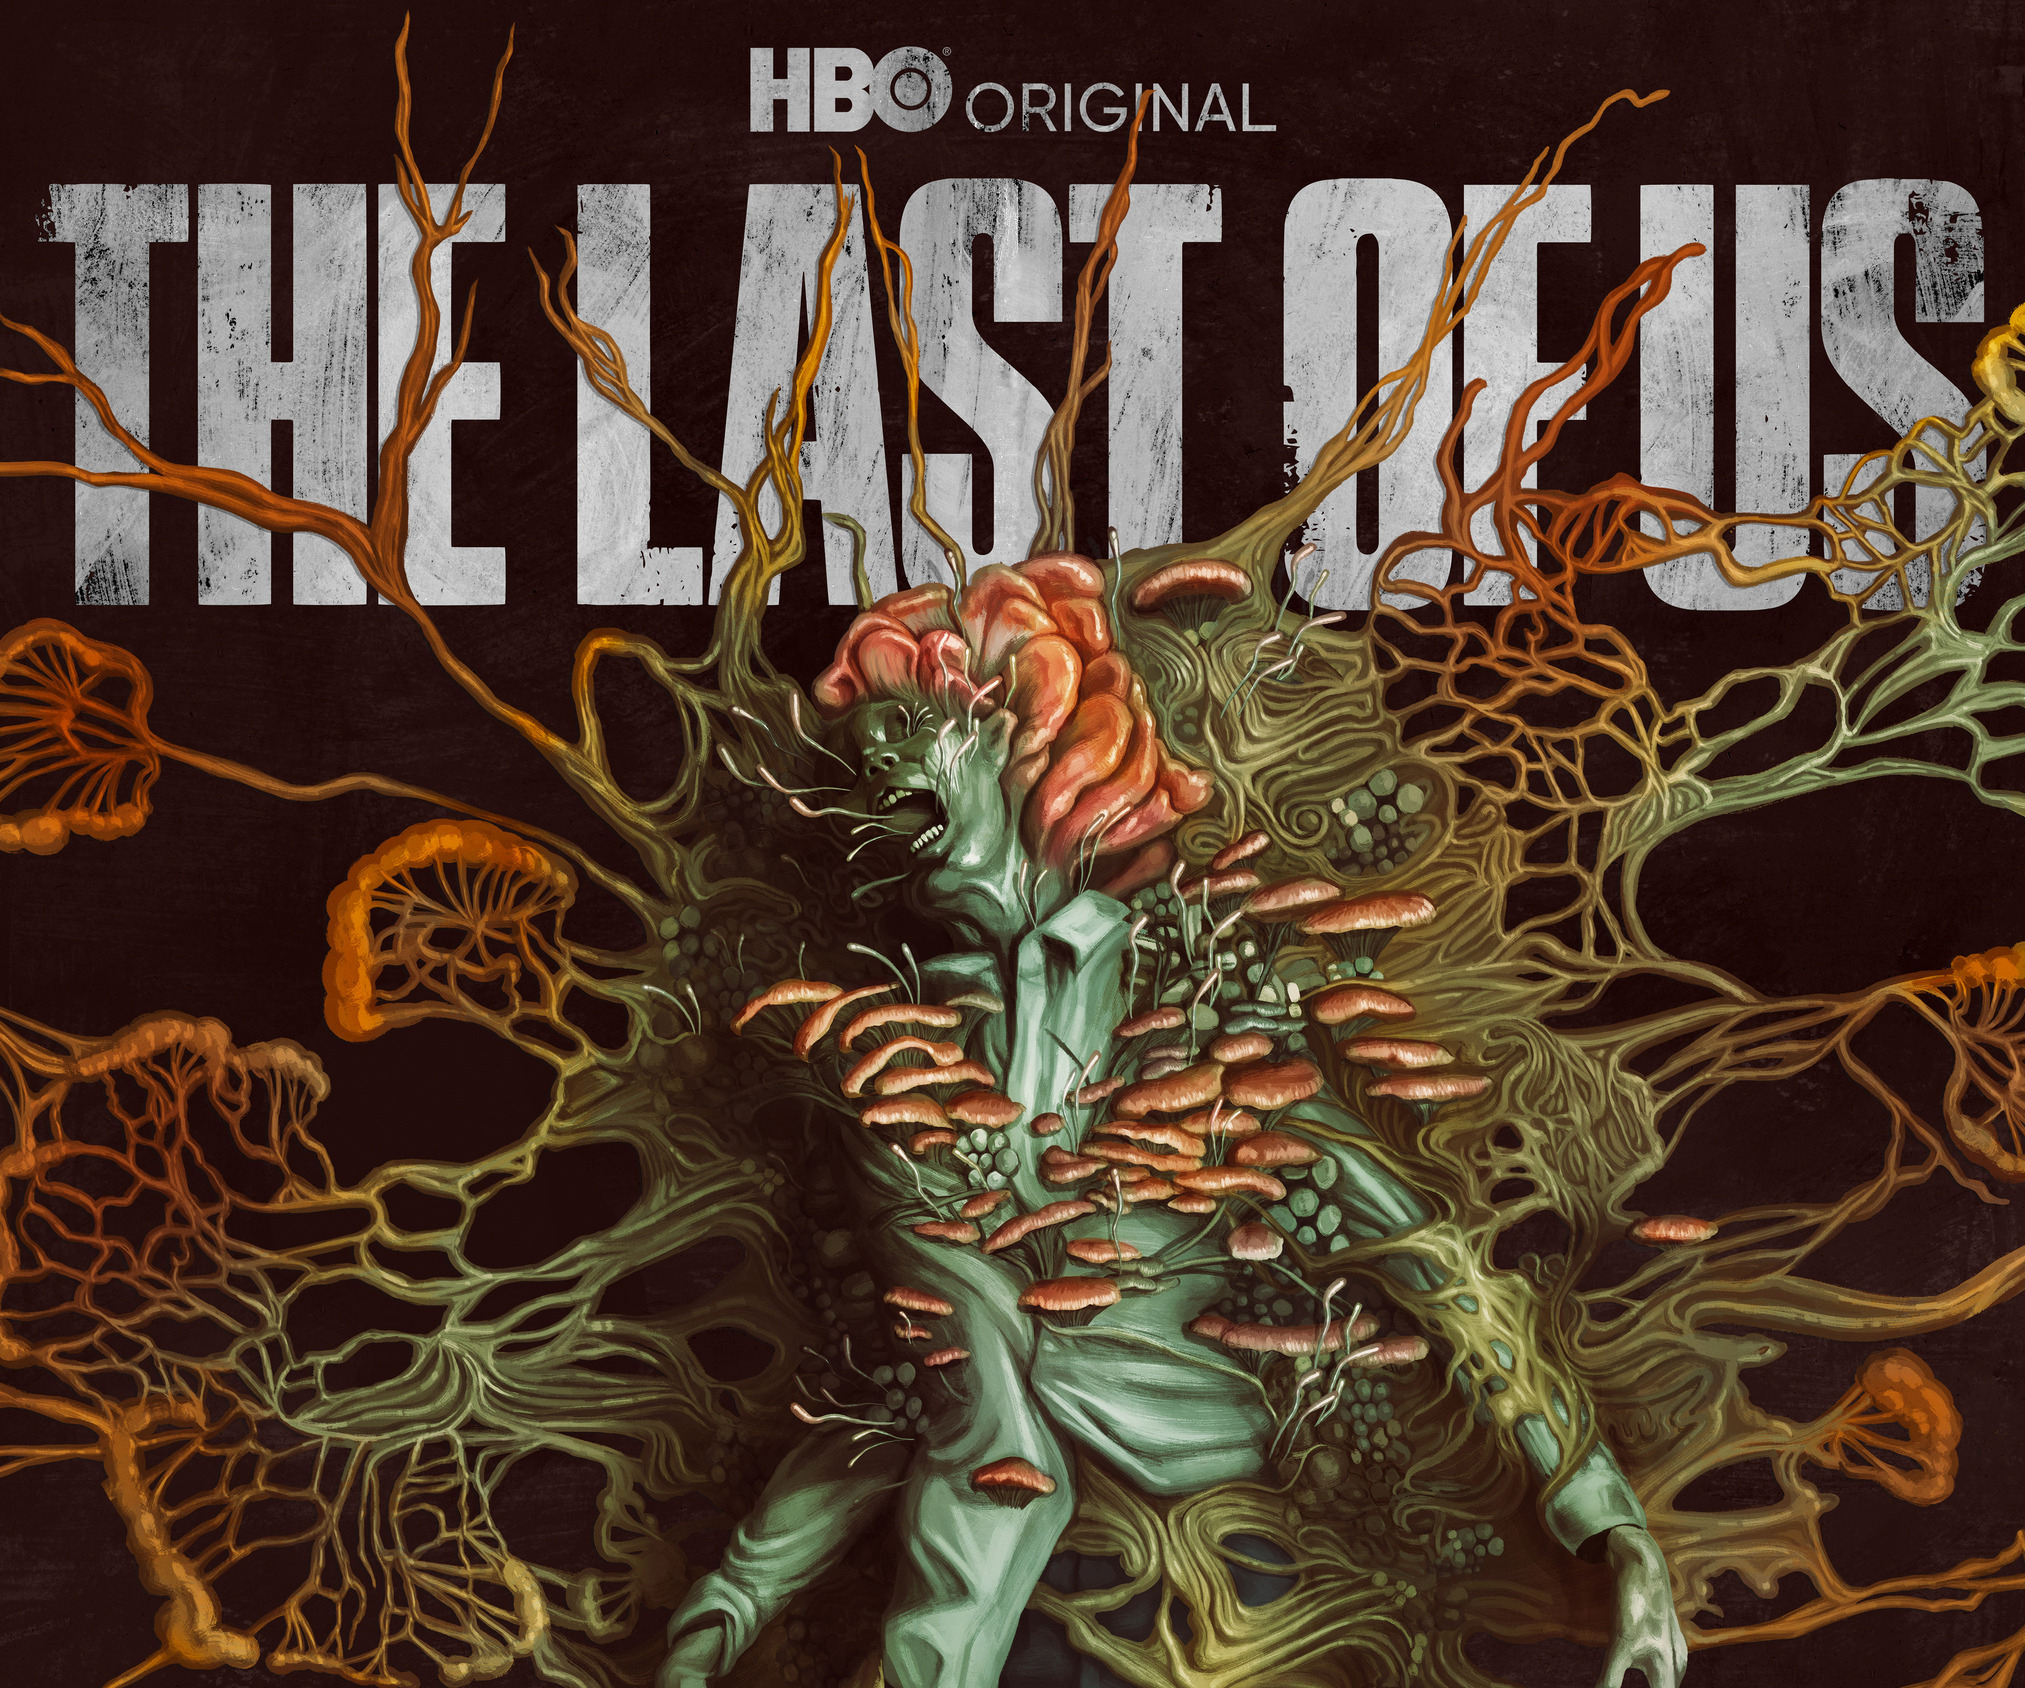 The Last of Us HBO Wallpaper for Phone 4k in 2023